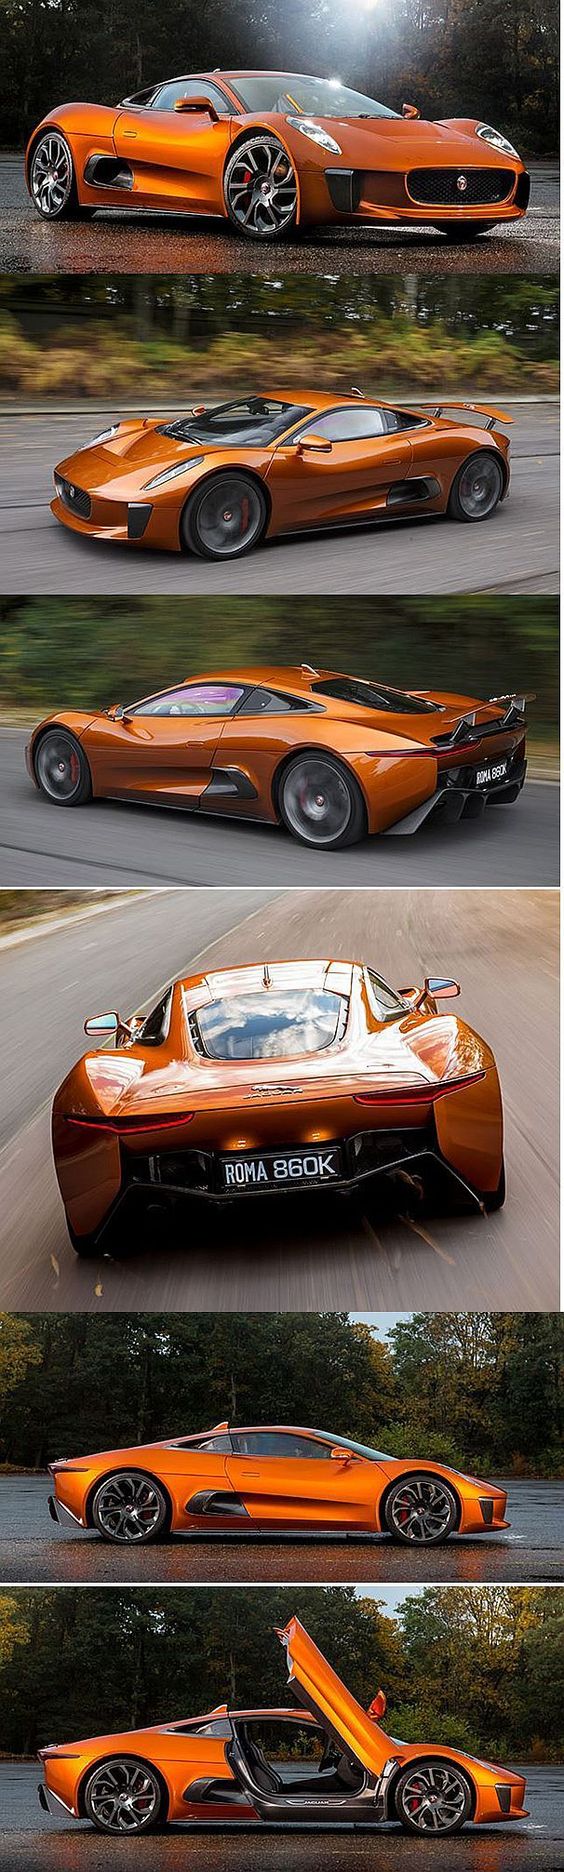 ‘’ Jaguar C-X75 ‘’ Cars Design And Concepts, Best Of New Cars, Awesome Cars